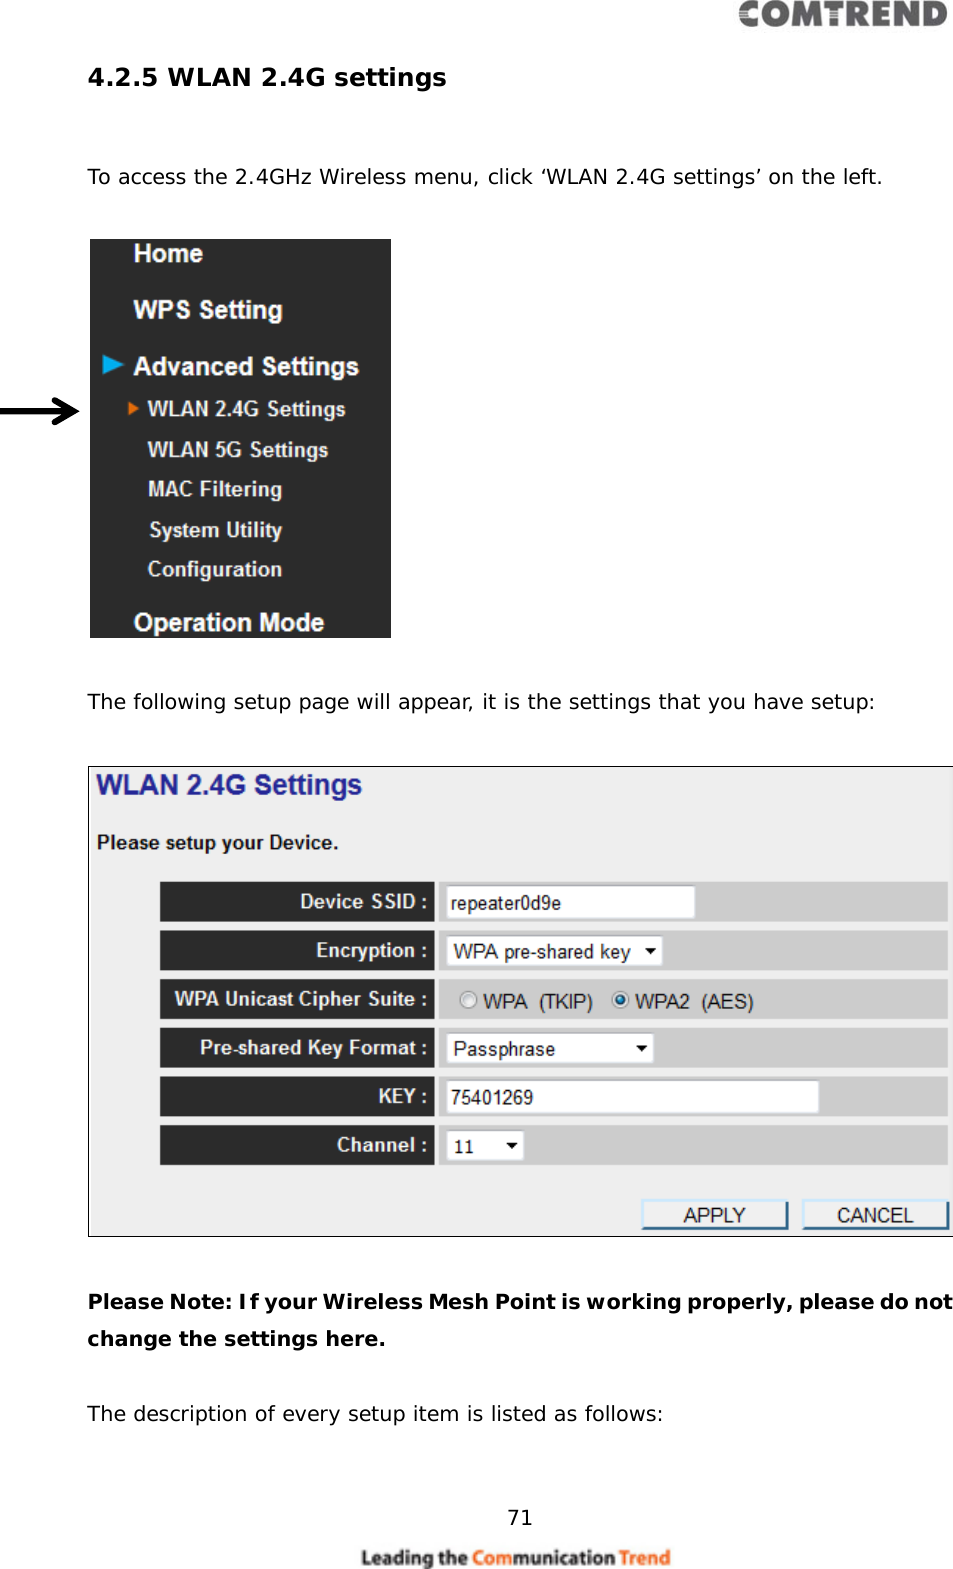     71  4.2.5 WLAN 2.4G settings  To access the 2.4GHz Wireless menu, click ‘WLAN 2.4G settings’ on the left.    The following setup page will appear, it is the settings that you have setup:    Please Note: If your Wireless Mesh Point is working properly, please do not change the settings here.  The description of every setup item is listed as follows:  